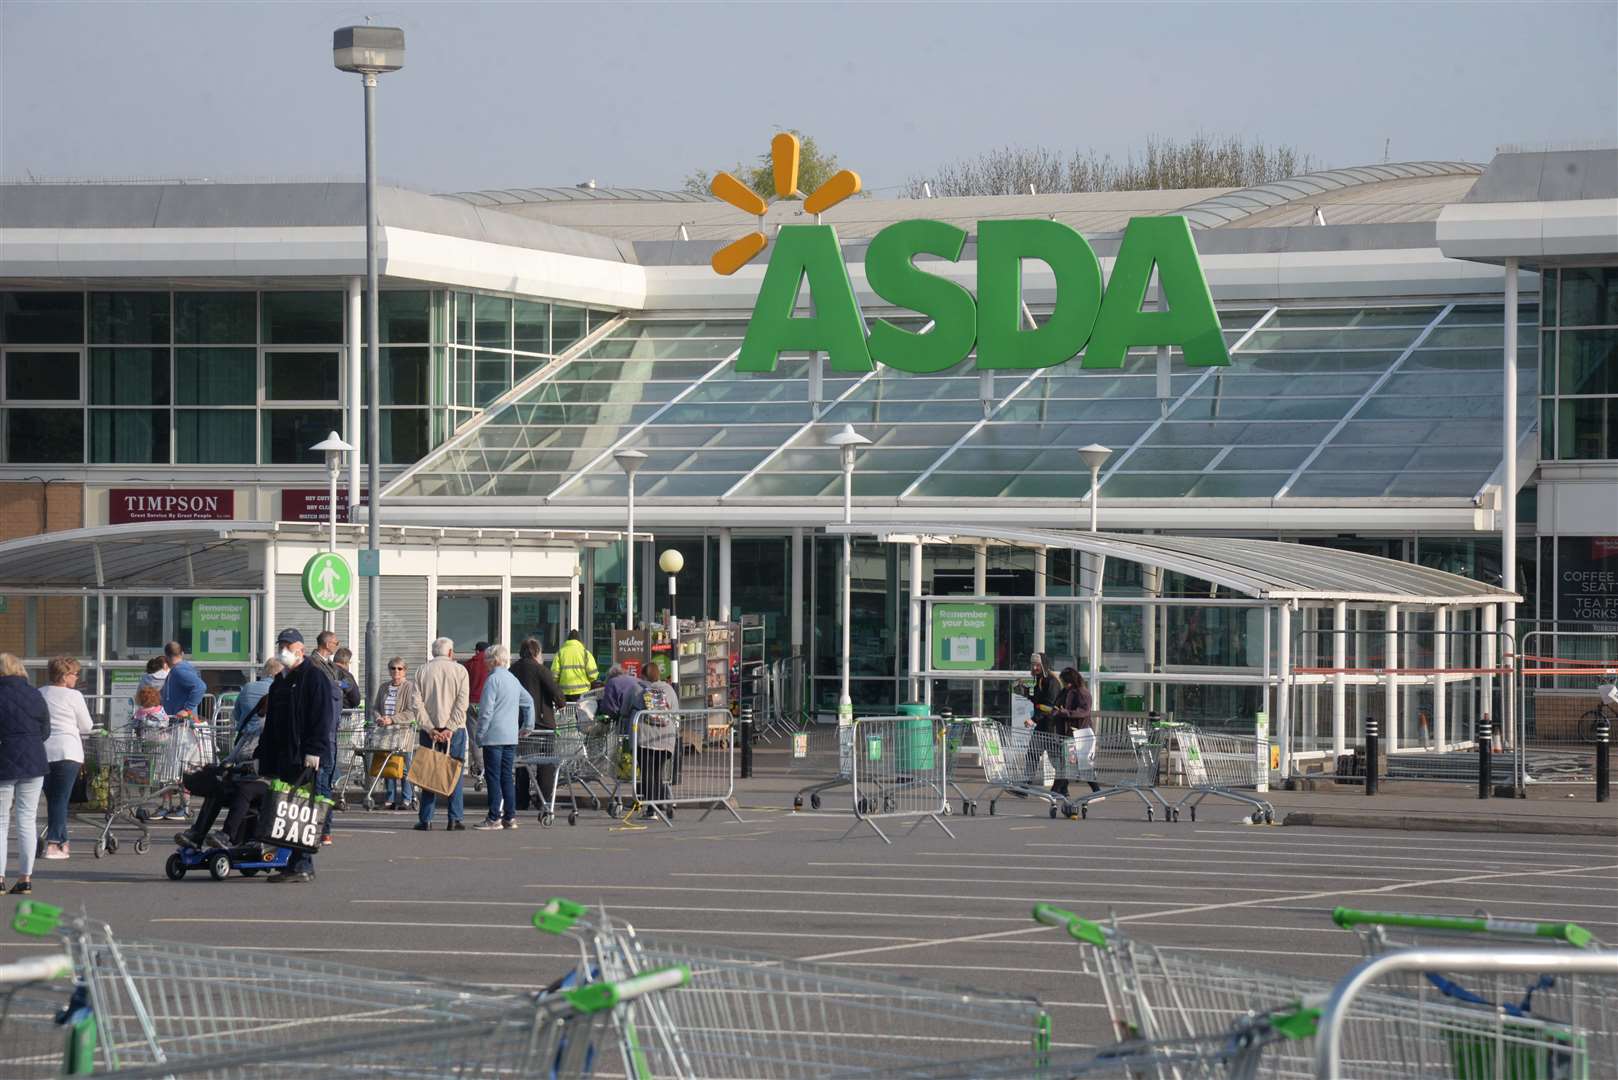 Asda is just over the road from where Aldi want to open